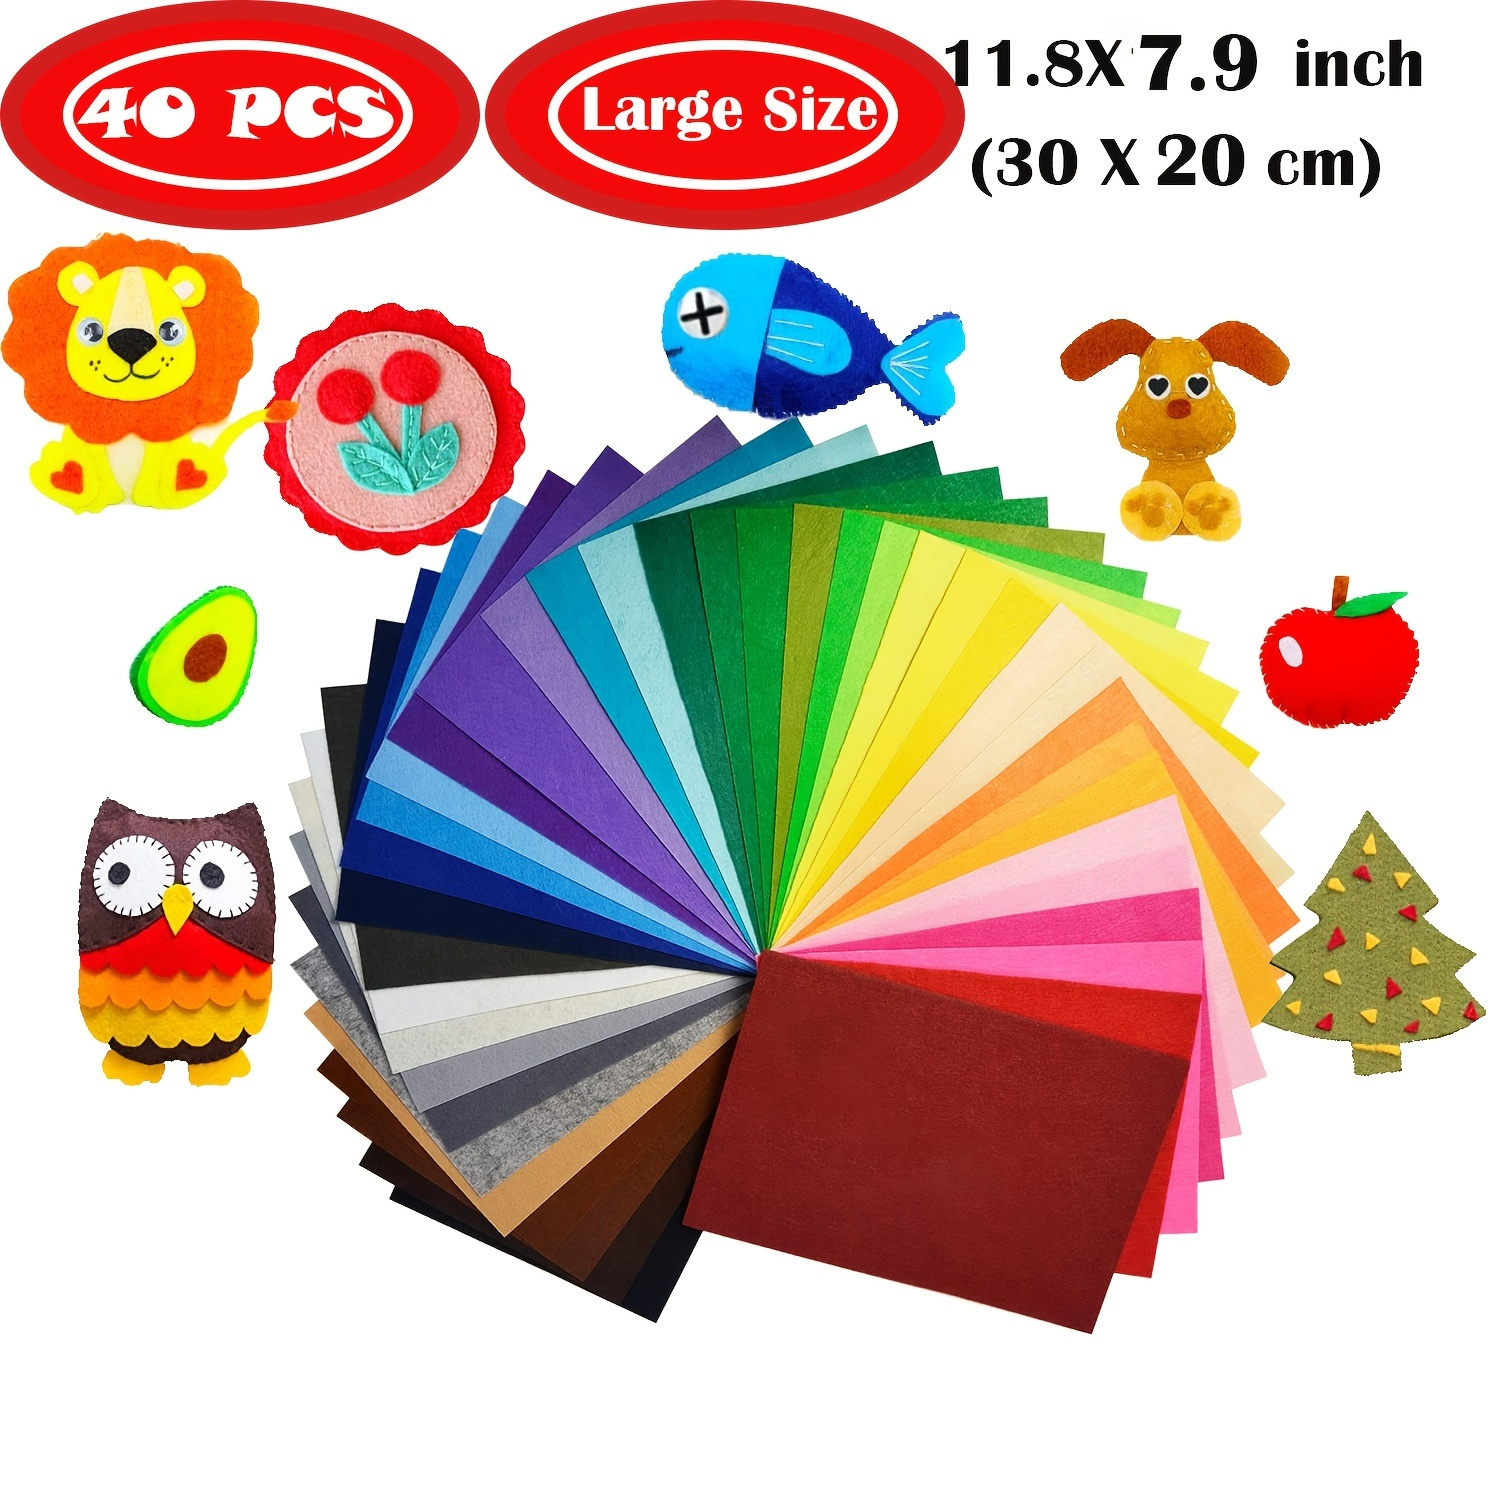 40Pcs Stiff Felt Fabric Sheets, 4 x 6 inches Craft Felt Sheets Assorted  Color 1mm Thick Stiff Craft Felt for DIY Crafts, Sewing, Crafting Projects  